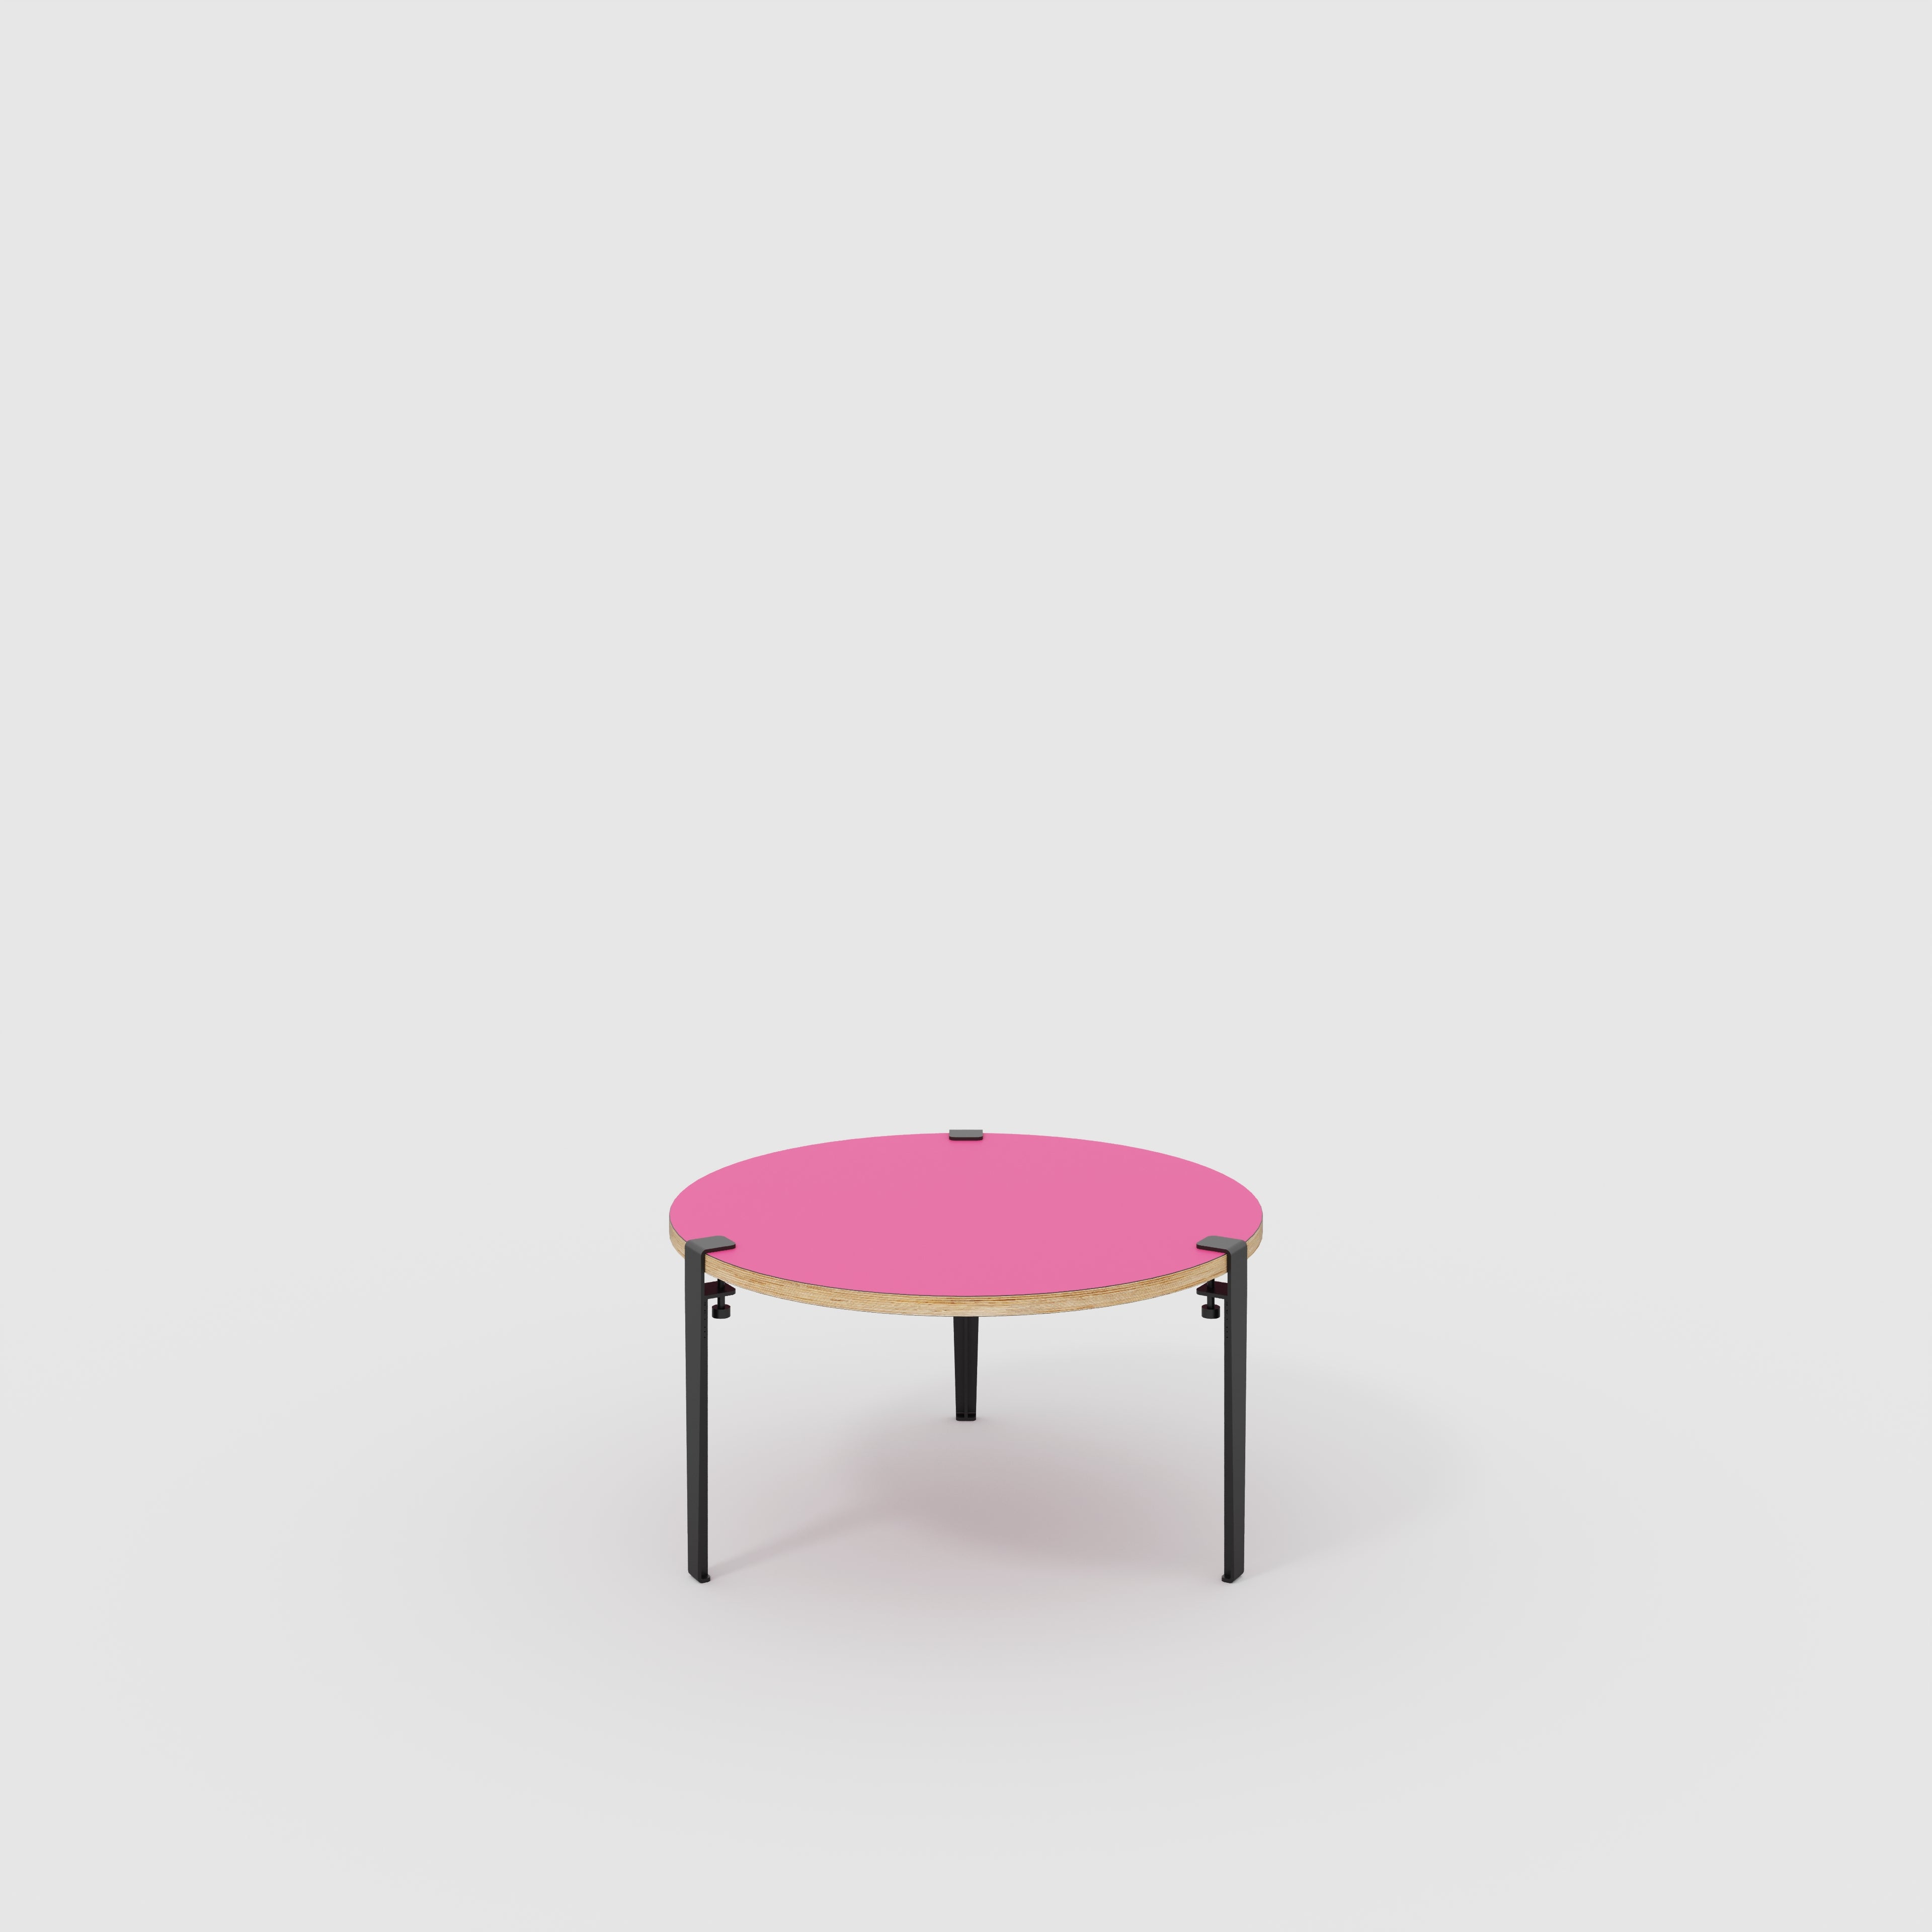 Round Coffee Table with Black Tiptoe Legs - Formica Juicy Pink - 800(dia) x 430(h)